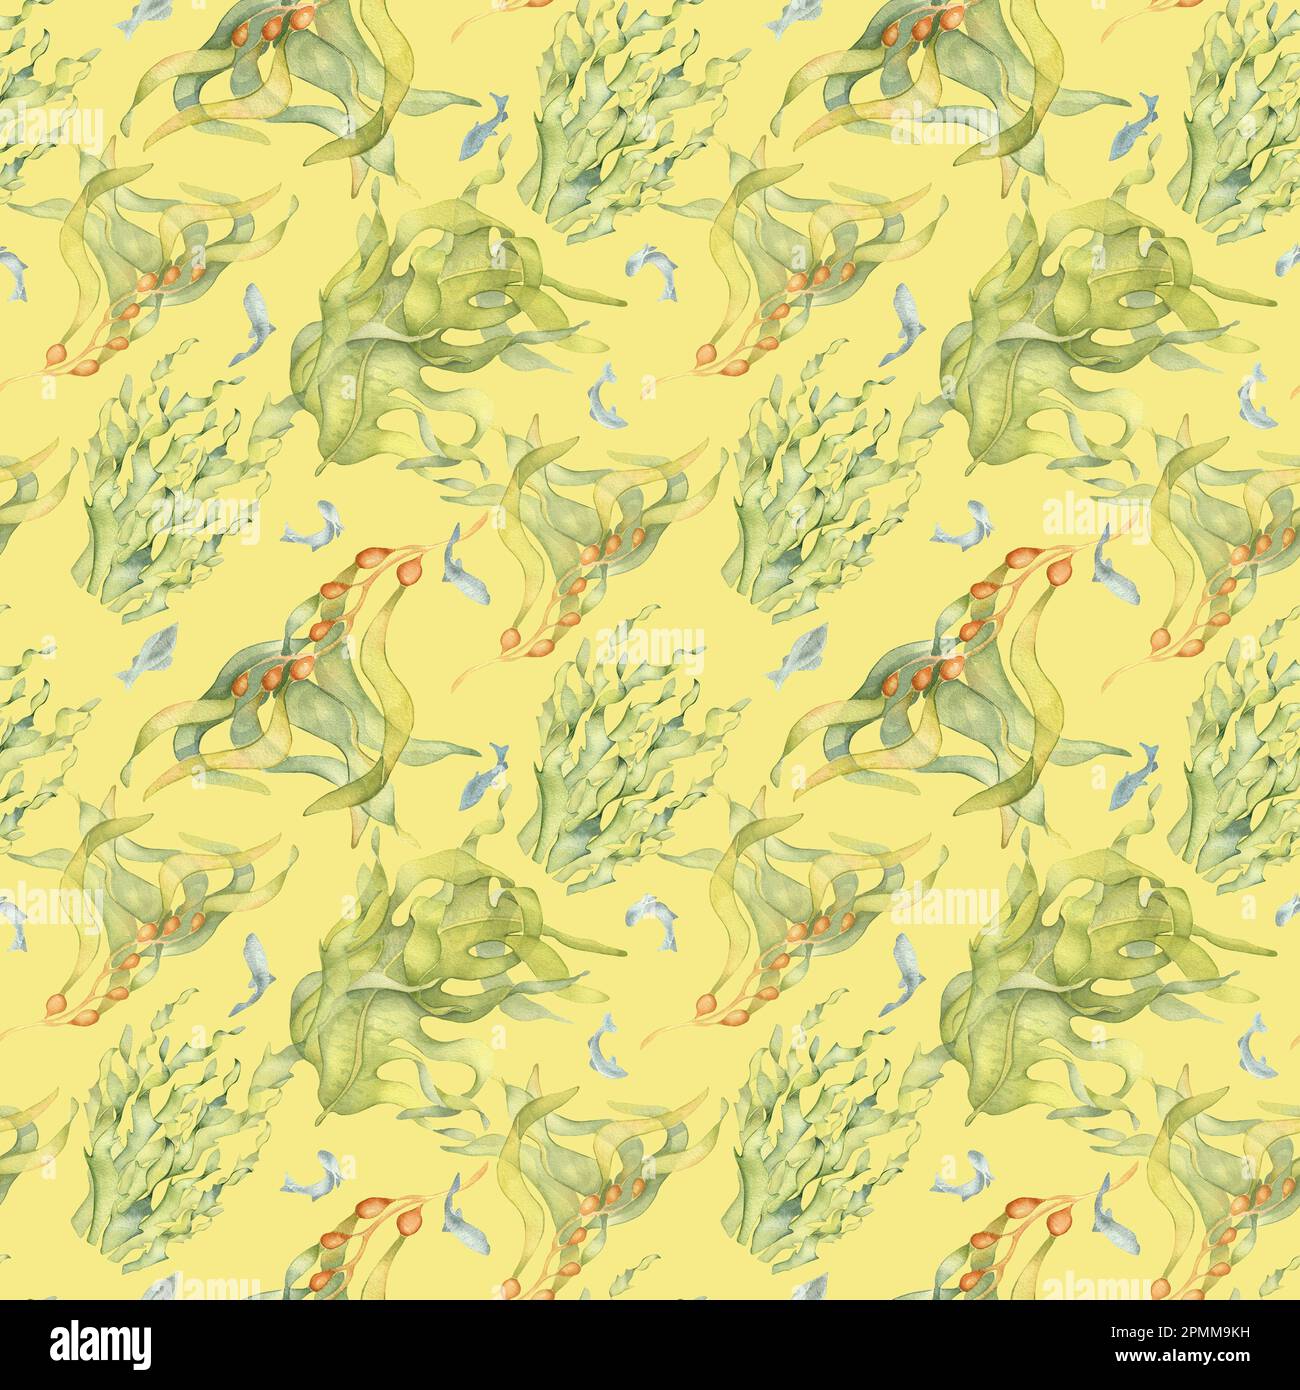 Seamless pattern of colorful sea plants watercolor illustration isolated on yellow. Laminaria, kelp, herb seaweeds hand drawn. Design for background, Stock Photo